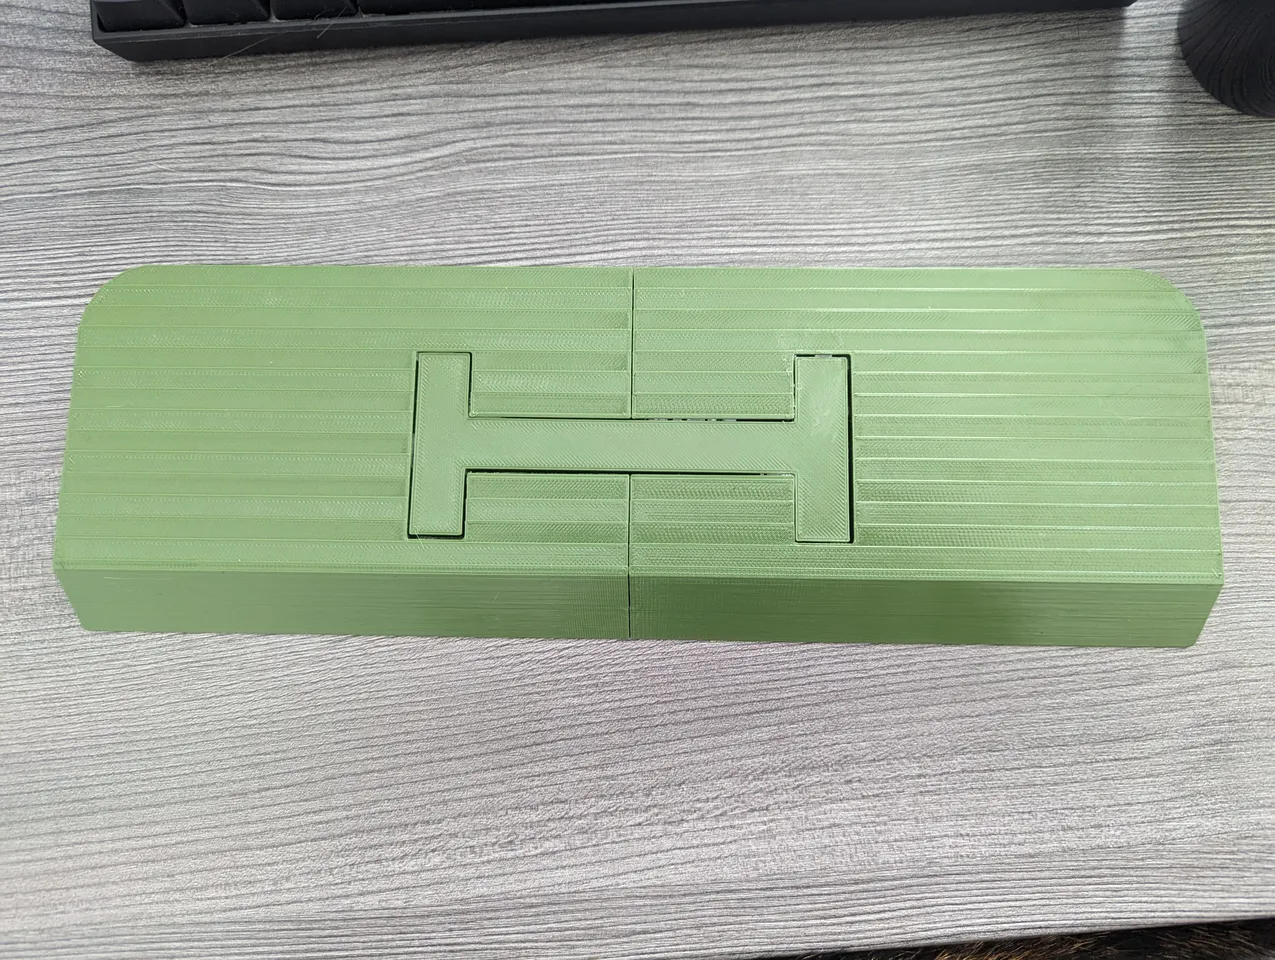 Wooting 60 HE Wrist Rest T-Slot Connector Mod by sudo | Download